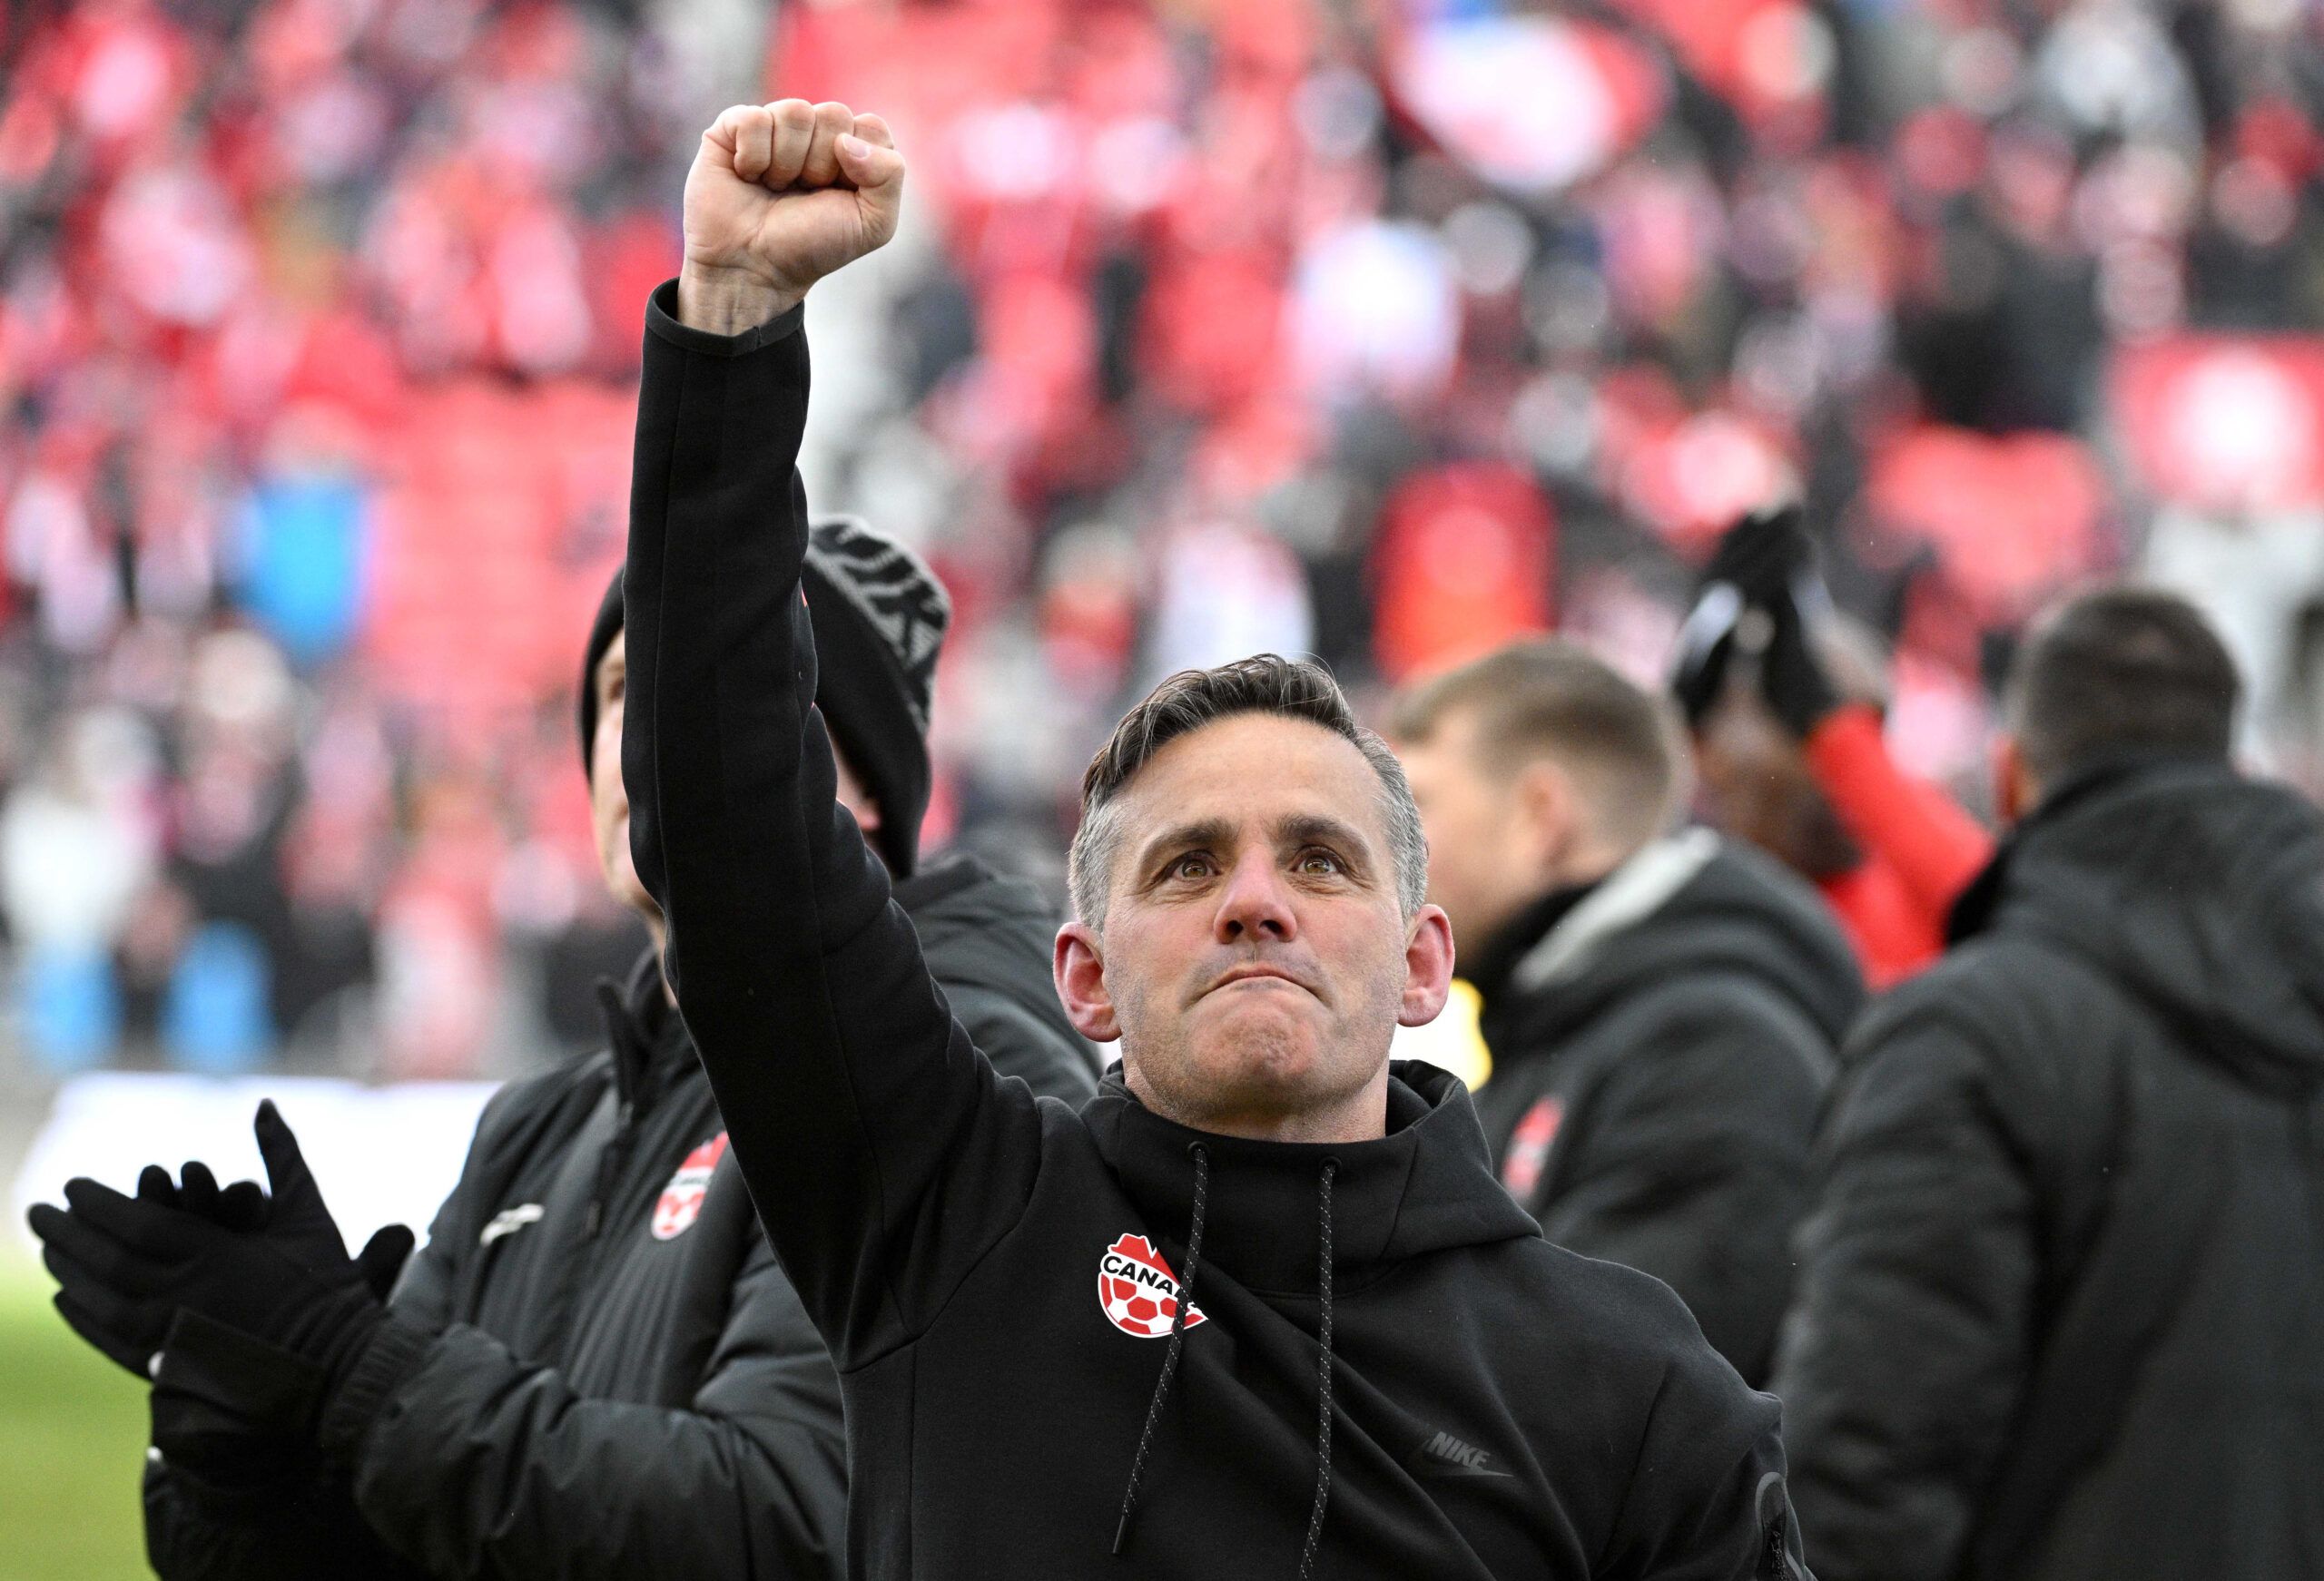 Mar 27, 2022; Toronto, Ontario, CAN;   Canada coach John Herdman reacts to fans after a win over Jamaica at BMO Field clinched qualification to the 2022 FIFA World Cup. Mandatory Credit: Dan Hamilton-USA TODAY Sports